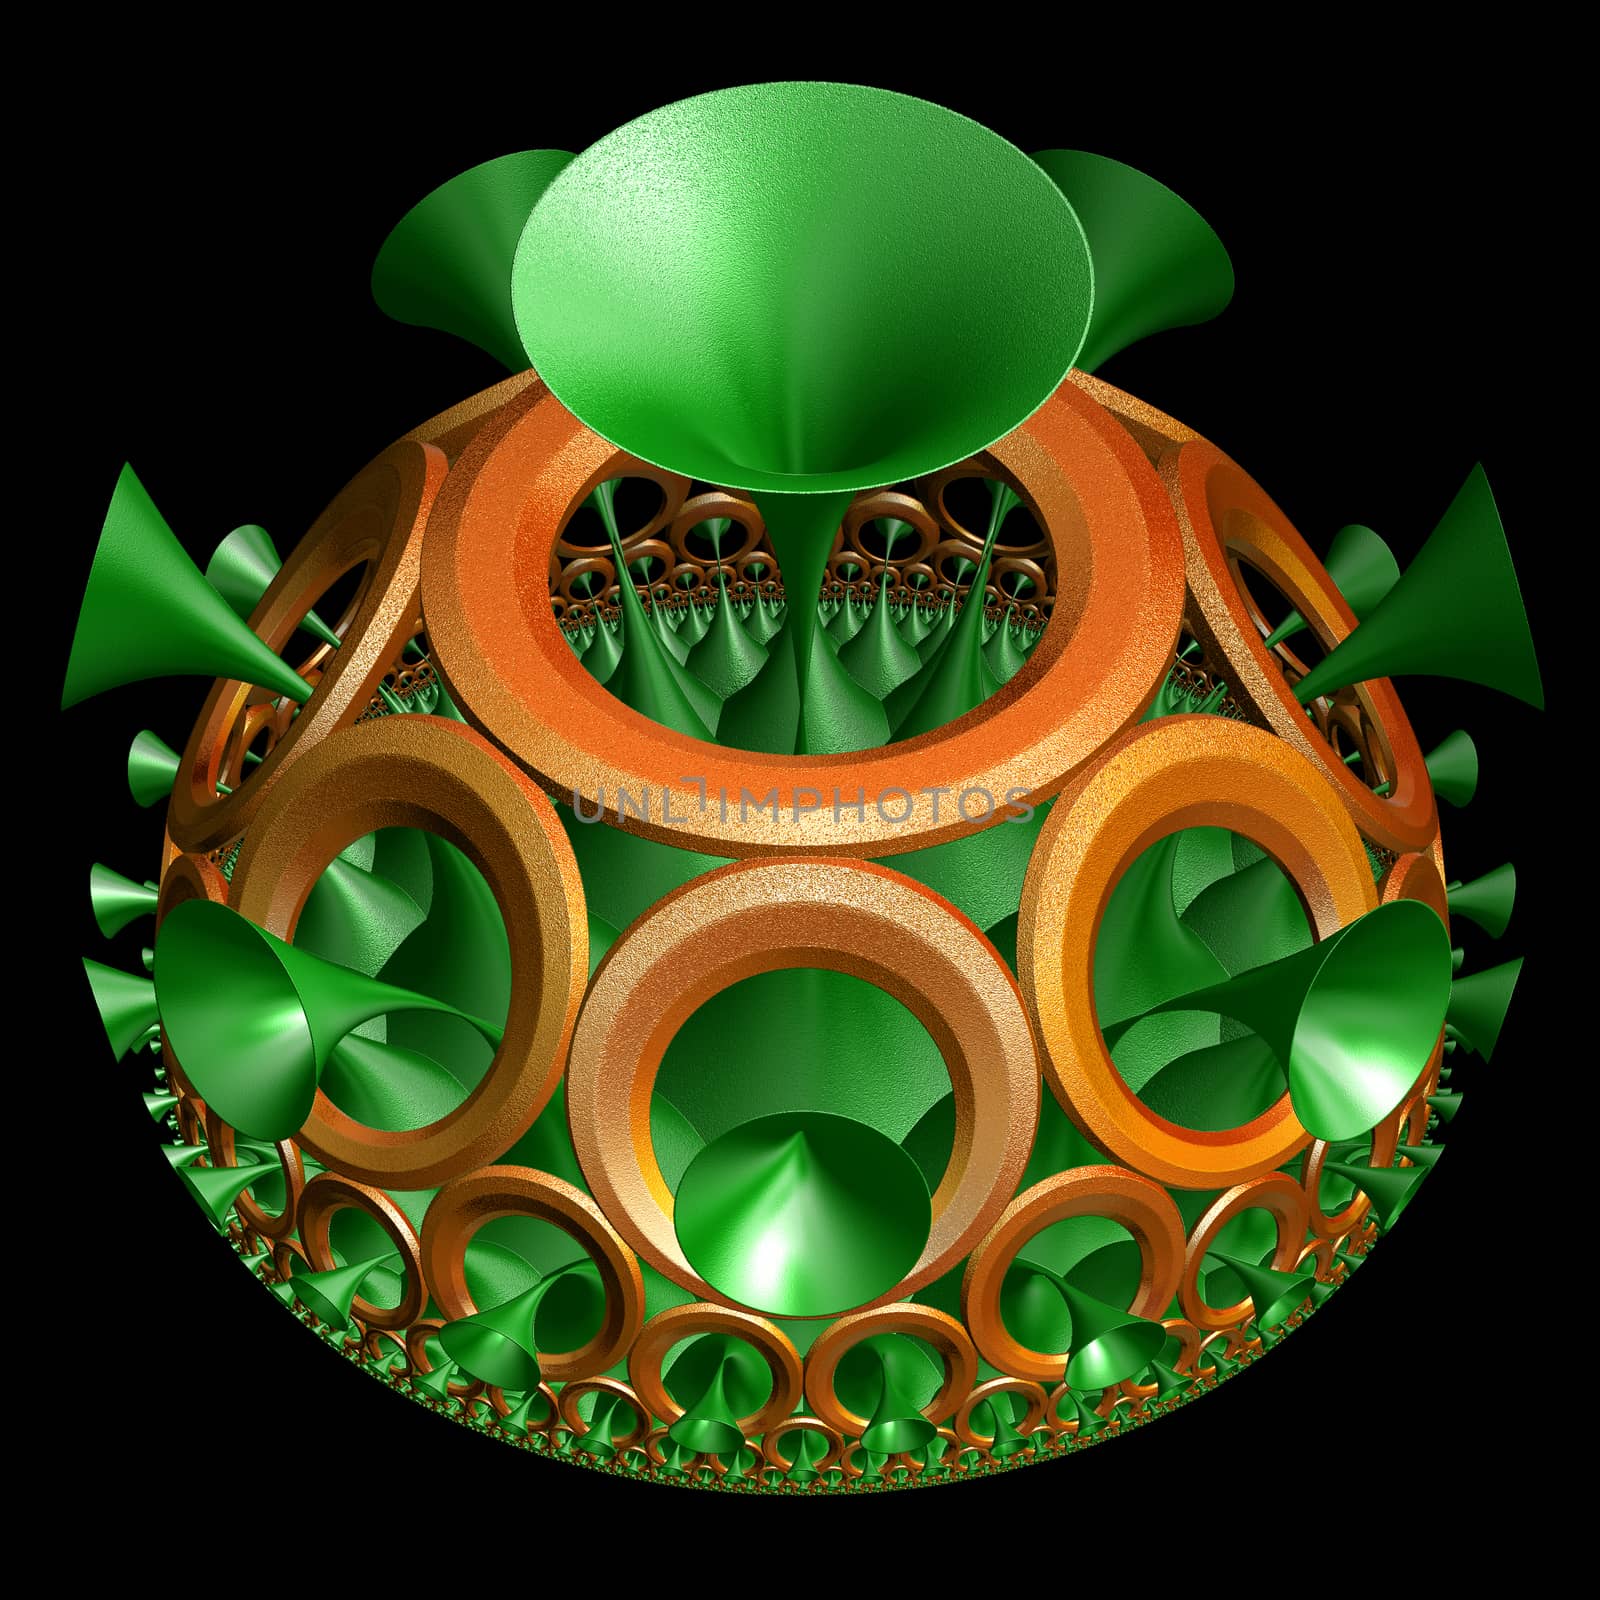 3D illustration of fractals calculated in the computer by Dr-Lange